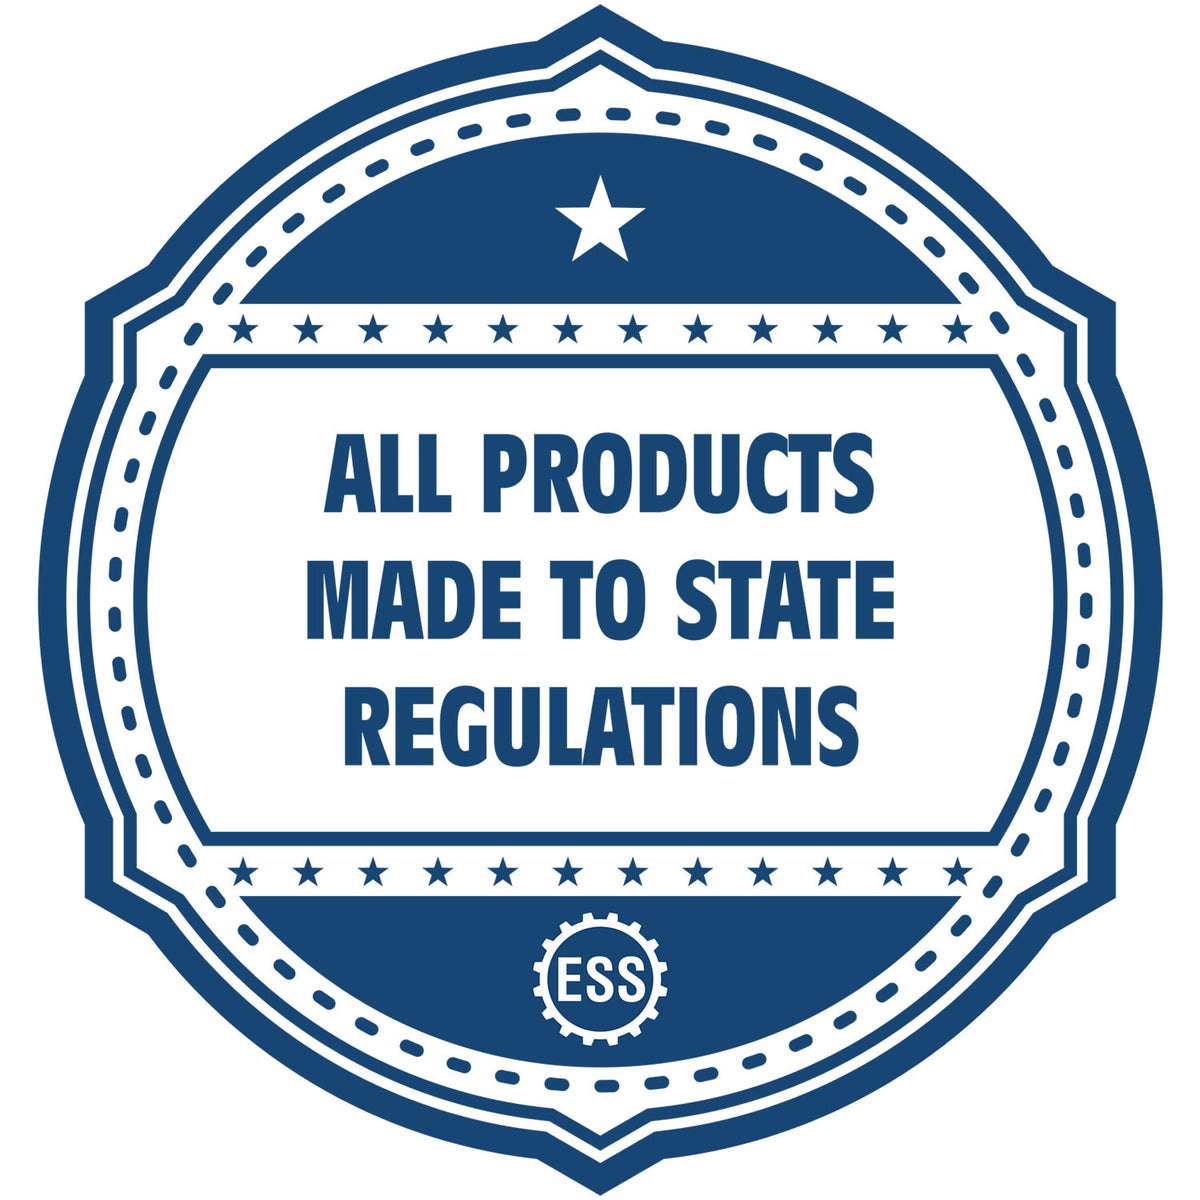 An icon or badge element for the Wooden Handle South Carolina State Seal Notary Public Stamp showing that this product is made in compliance with state regulations.